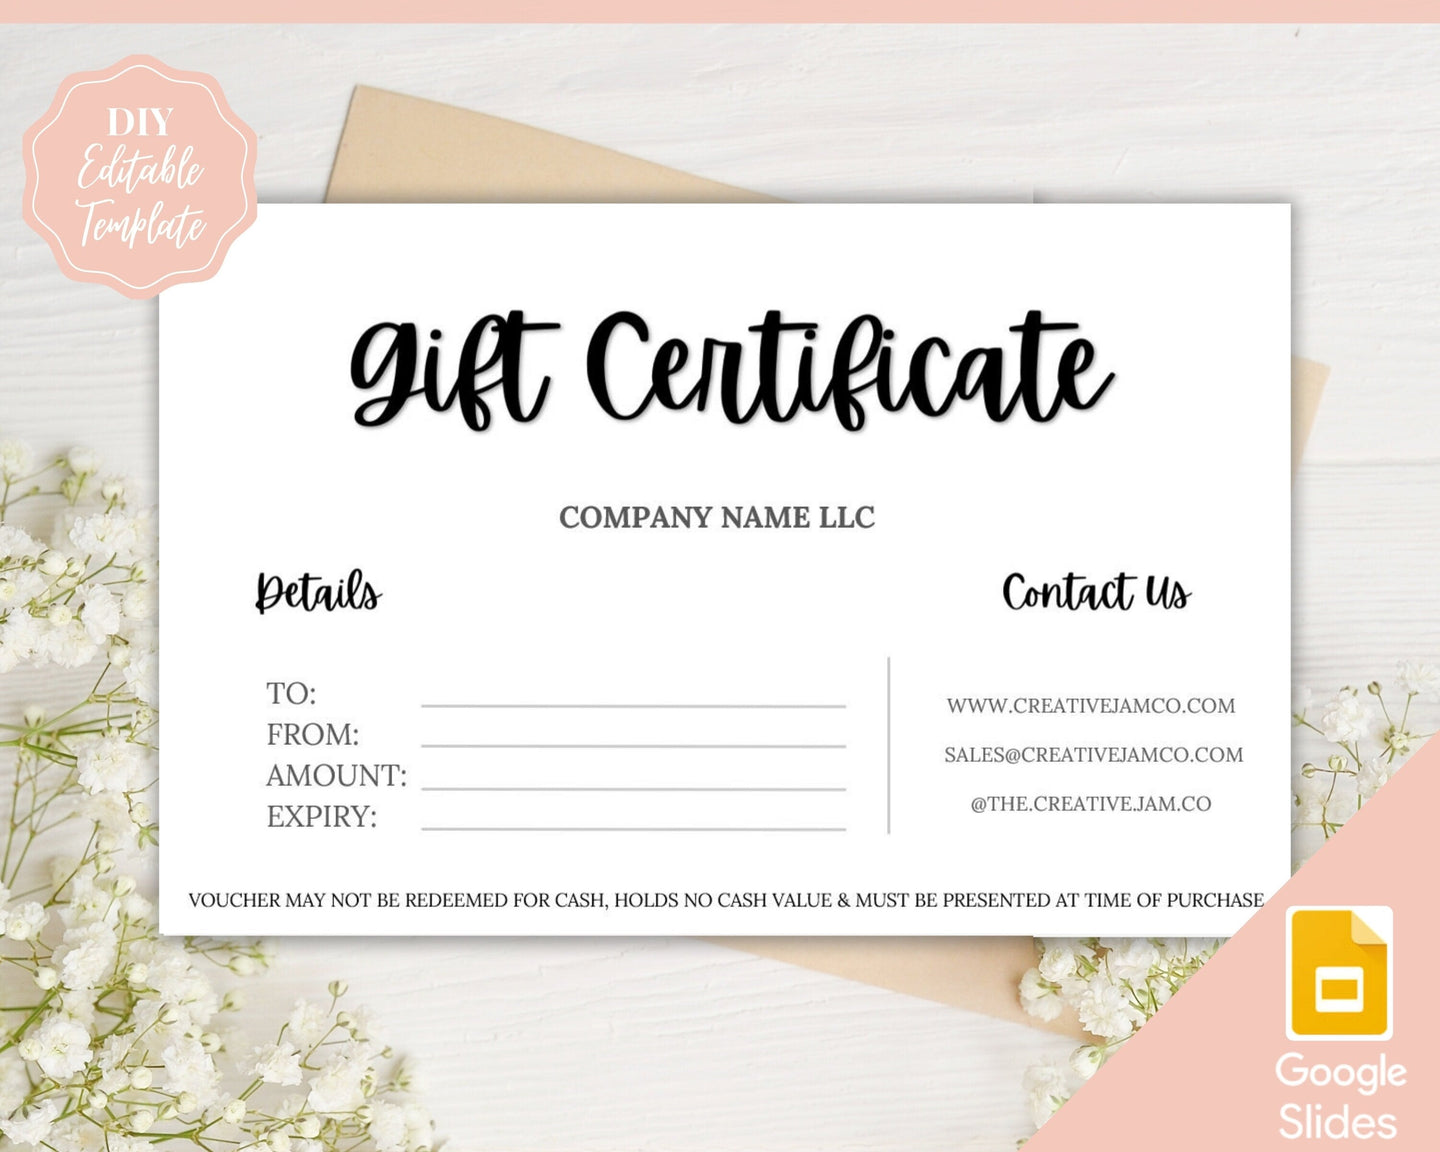 Gift Voucher, Gift Certificate Template. Editable Gift Card template, DIY Shop Voucher Template. DIY Coupons for last minute gift. Editable | Style 6